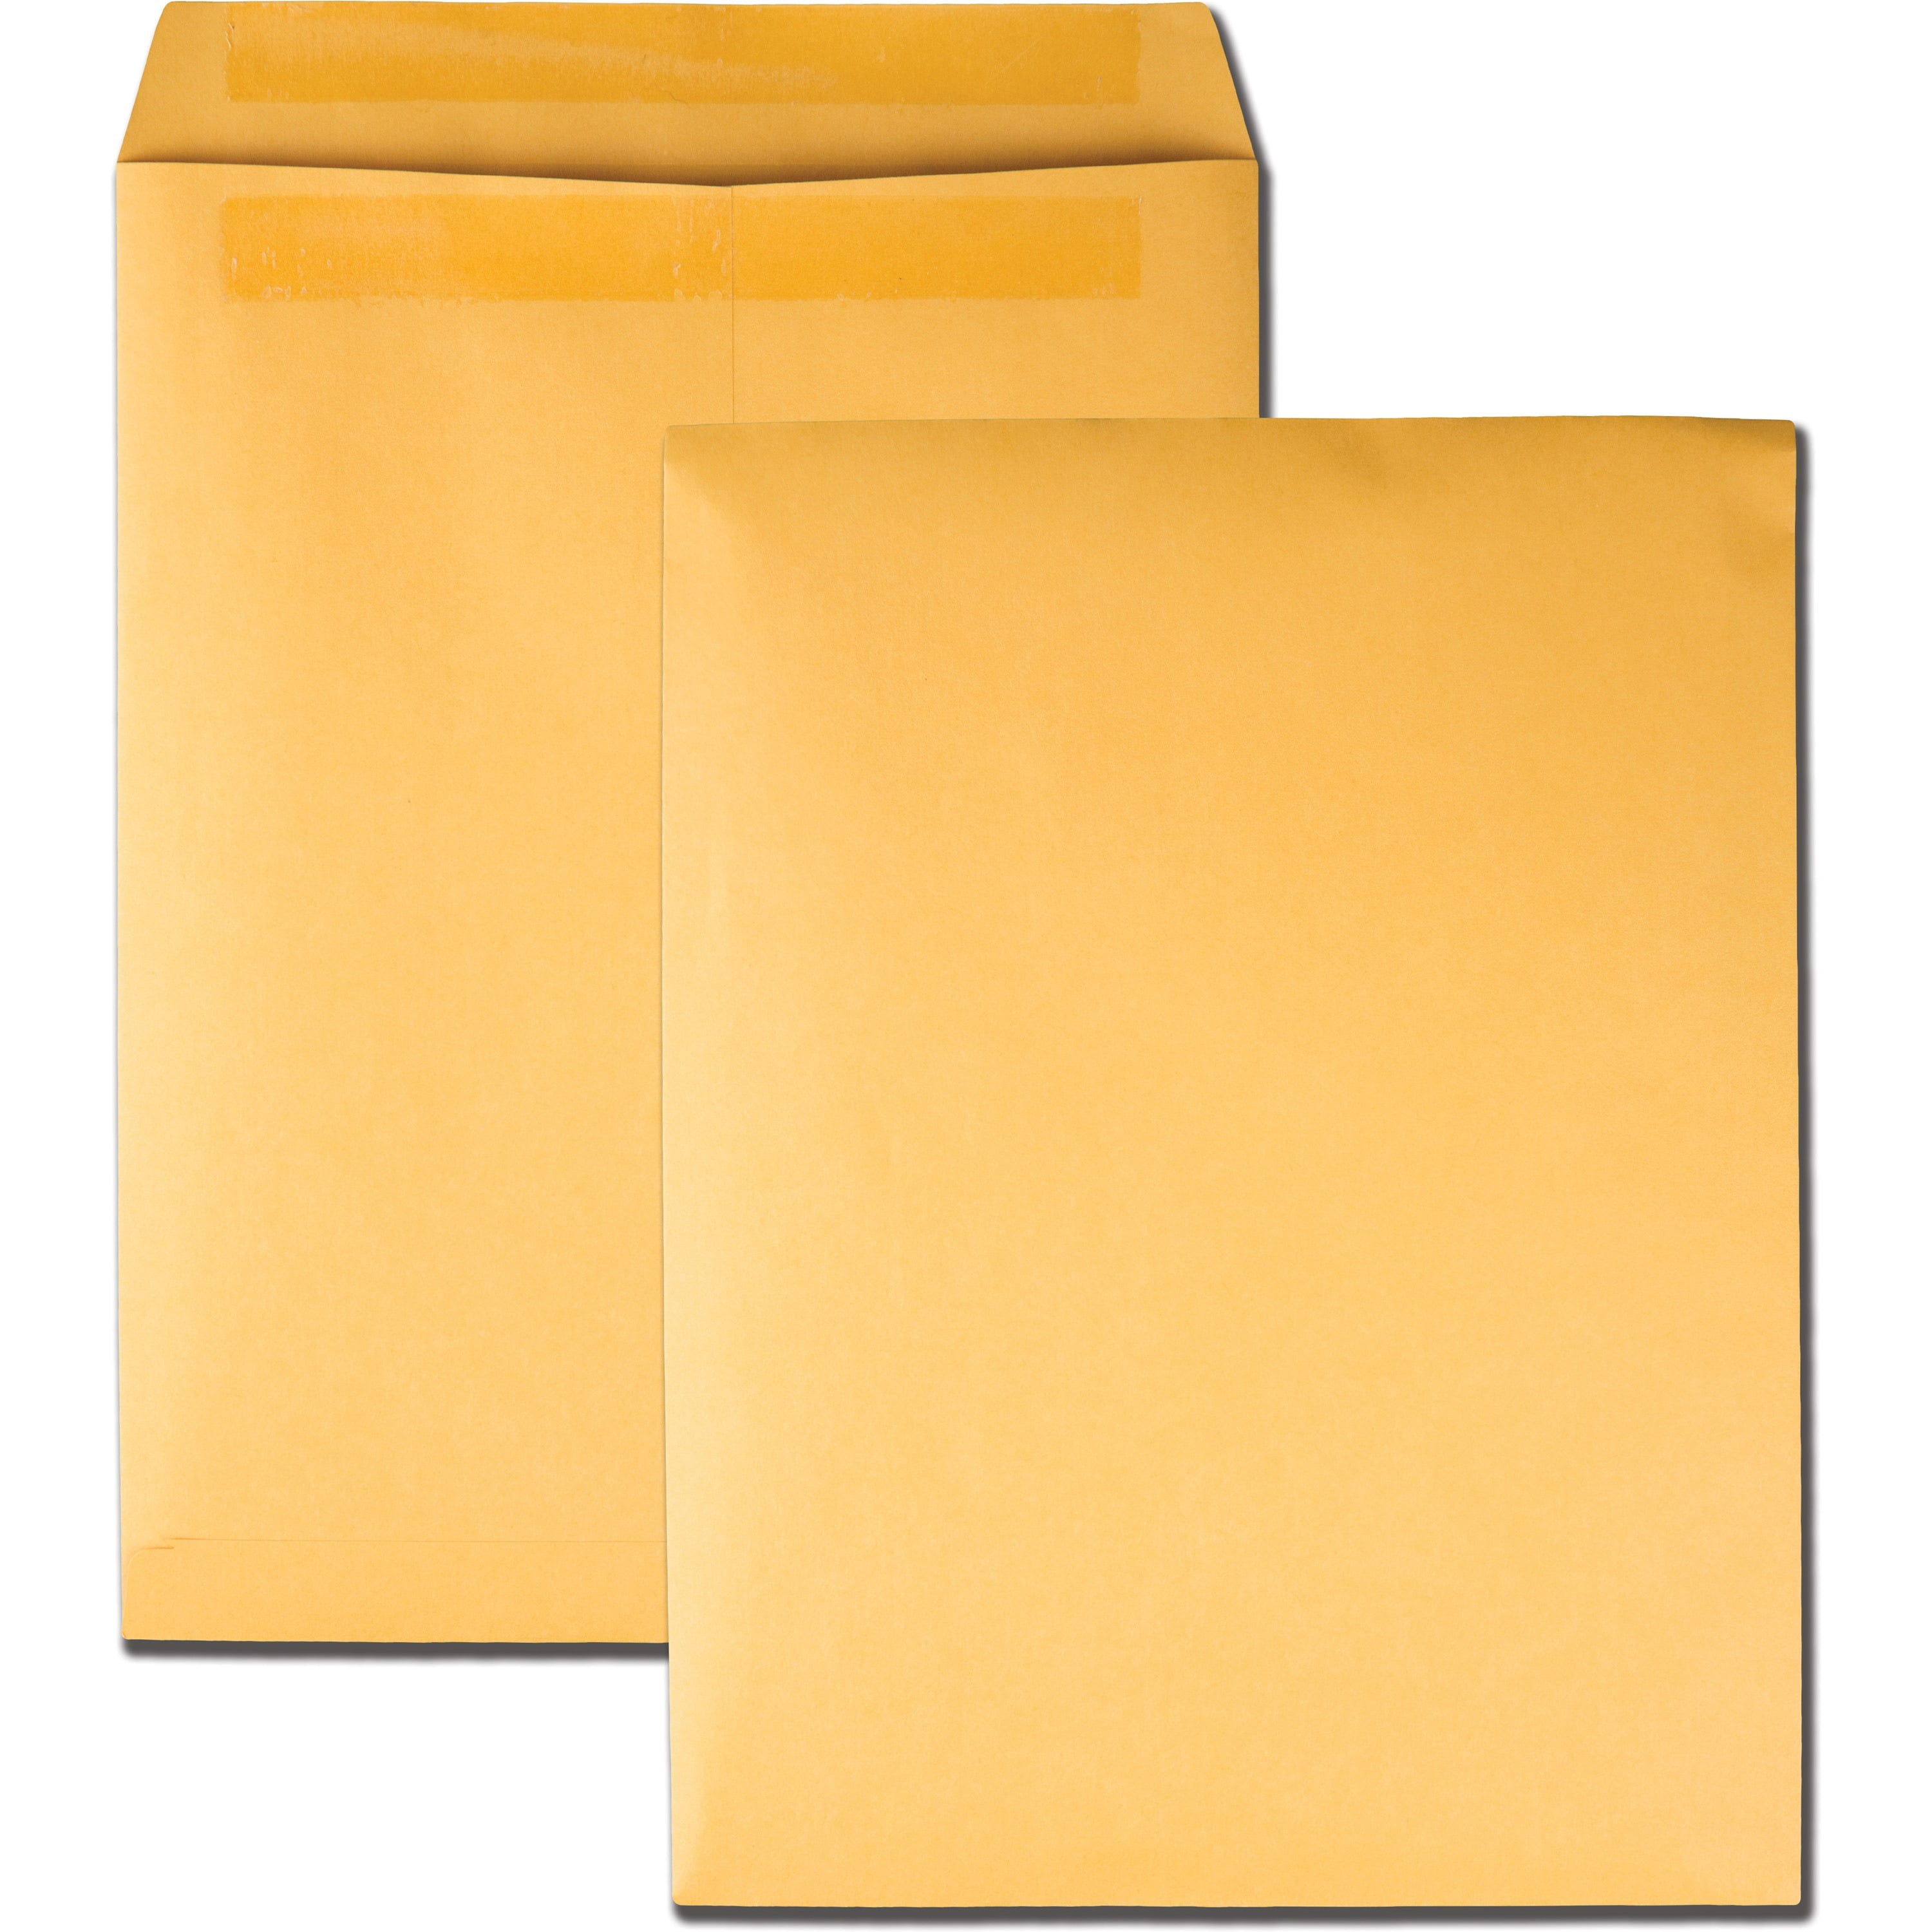 50 Envelopes 9 x 12 inches Red 5-Pack Details about   New Quality Park Clasp Envelopes